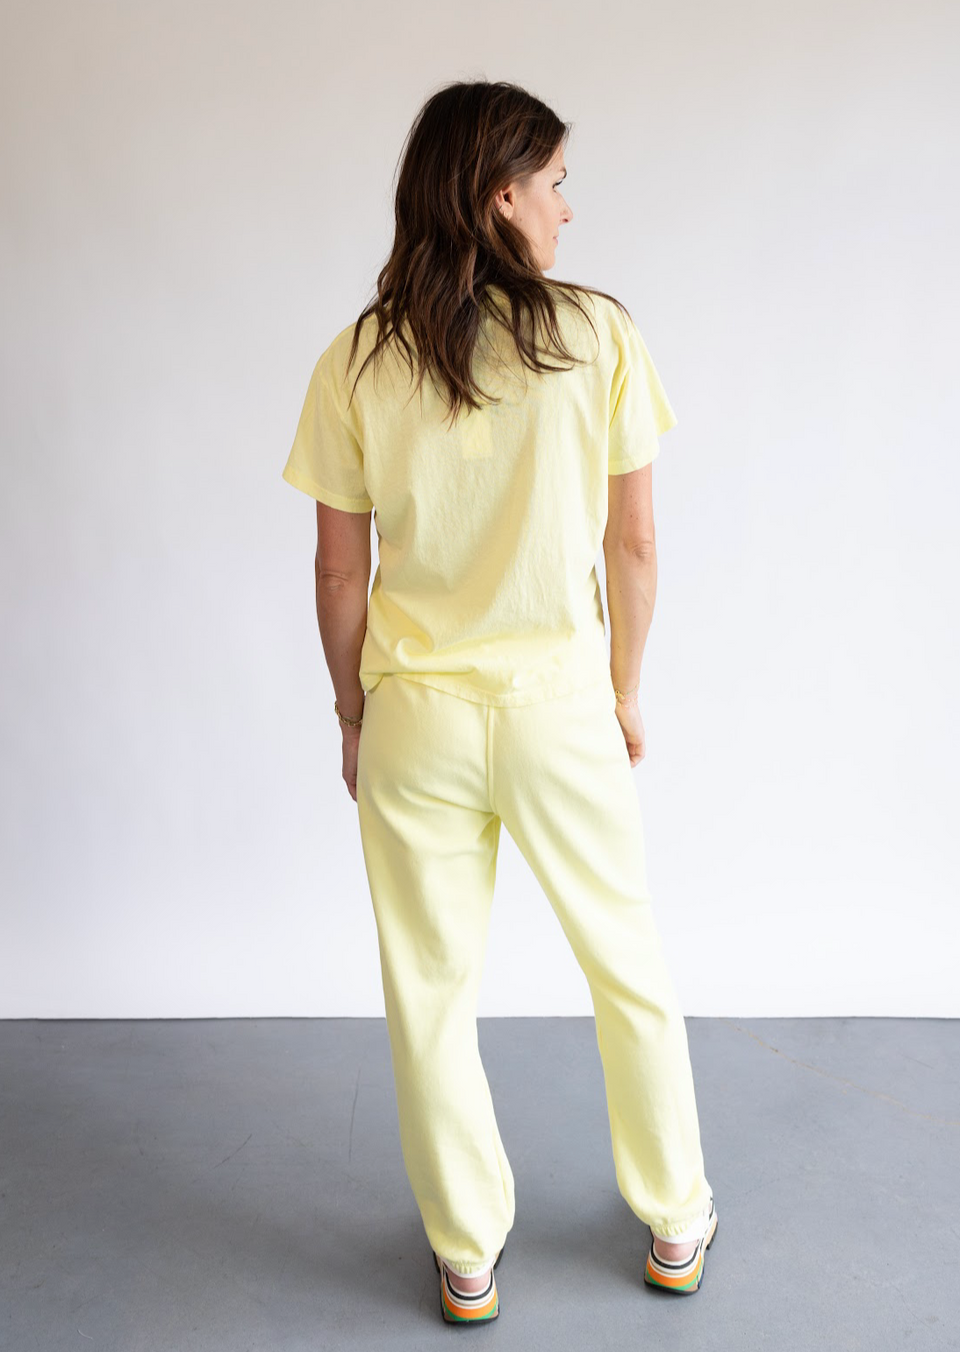 The Jonny Sweatpant in Lemonade from Perfect White Tee